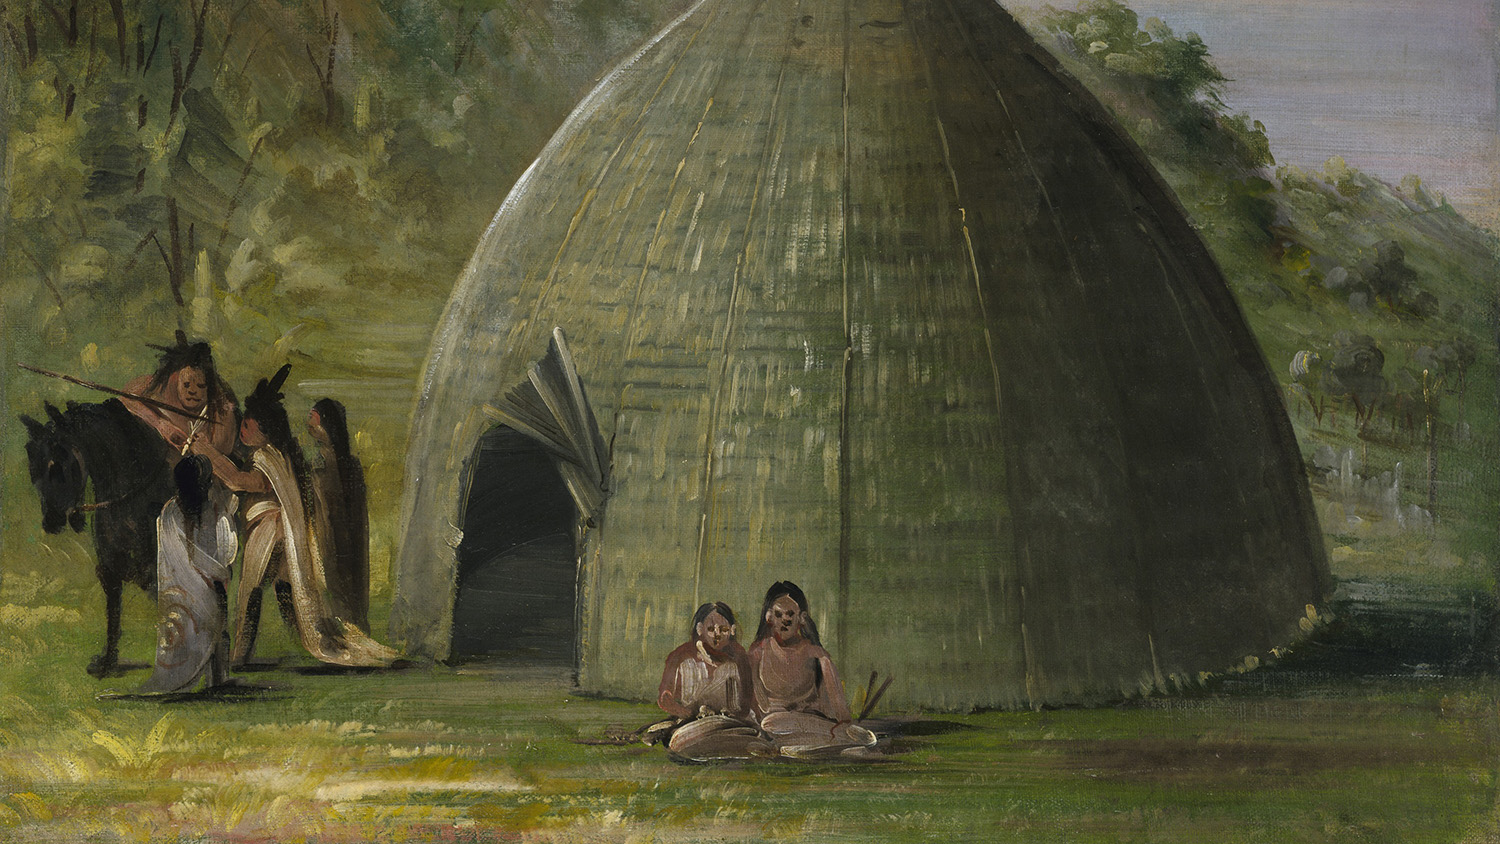 Painting of indigenous people and their home.